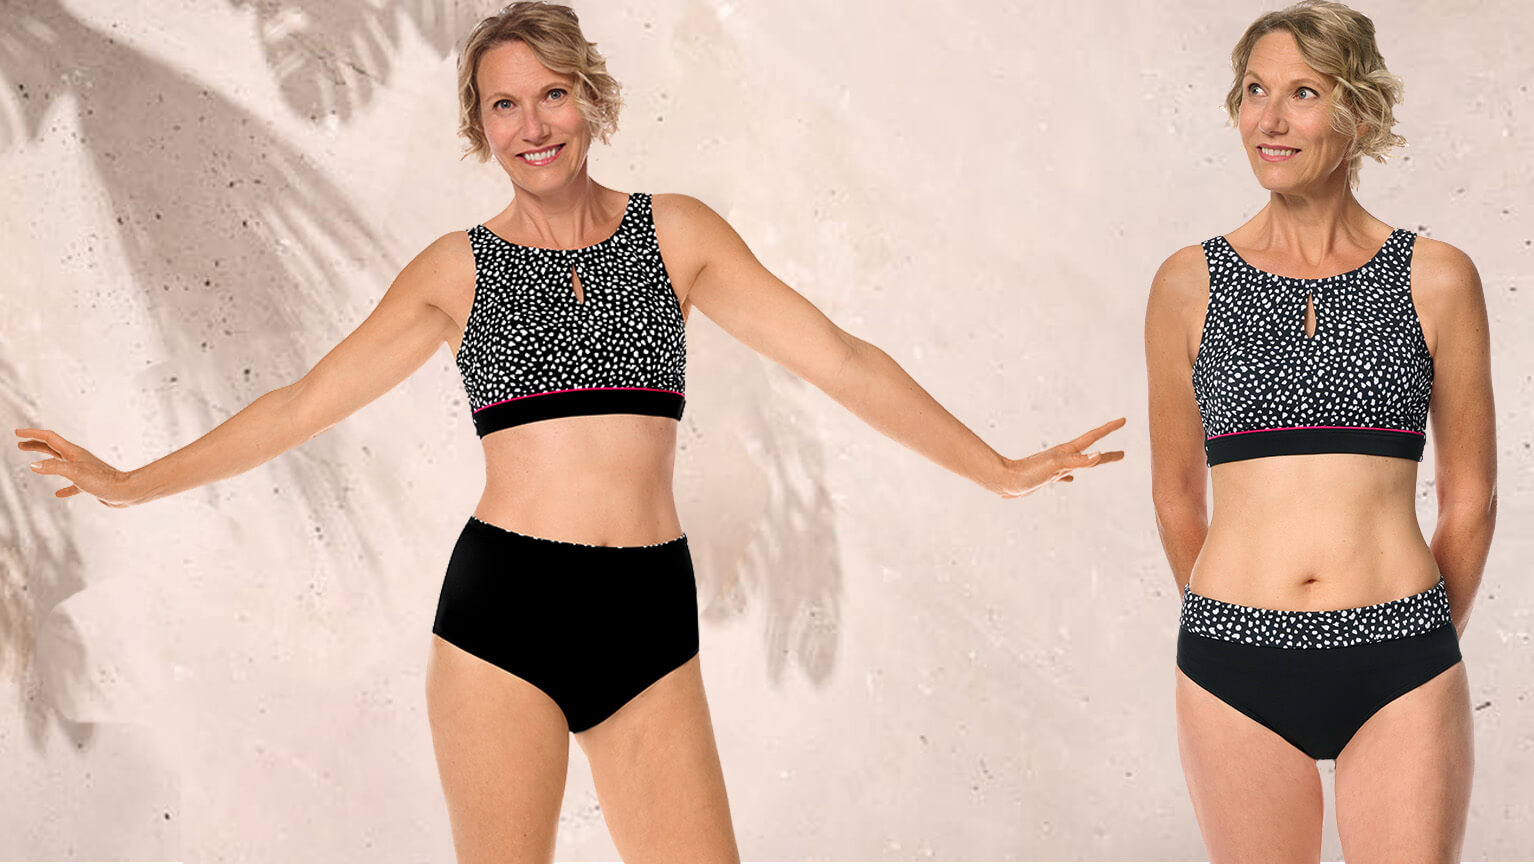 How to Make an Easy and Inexpensive Post-Mastectomy Swimsuit - Bellatory